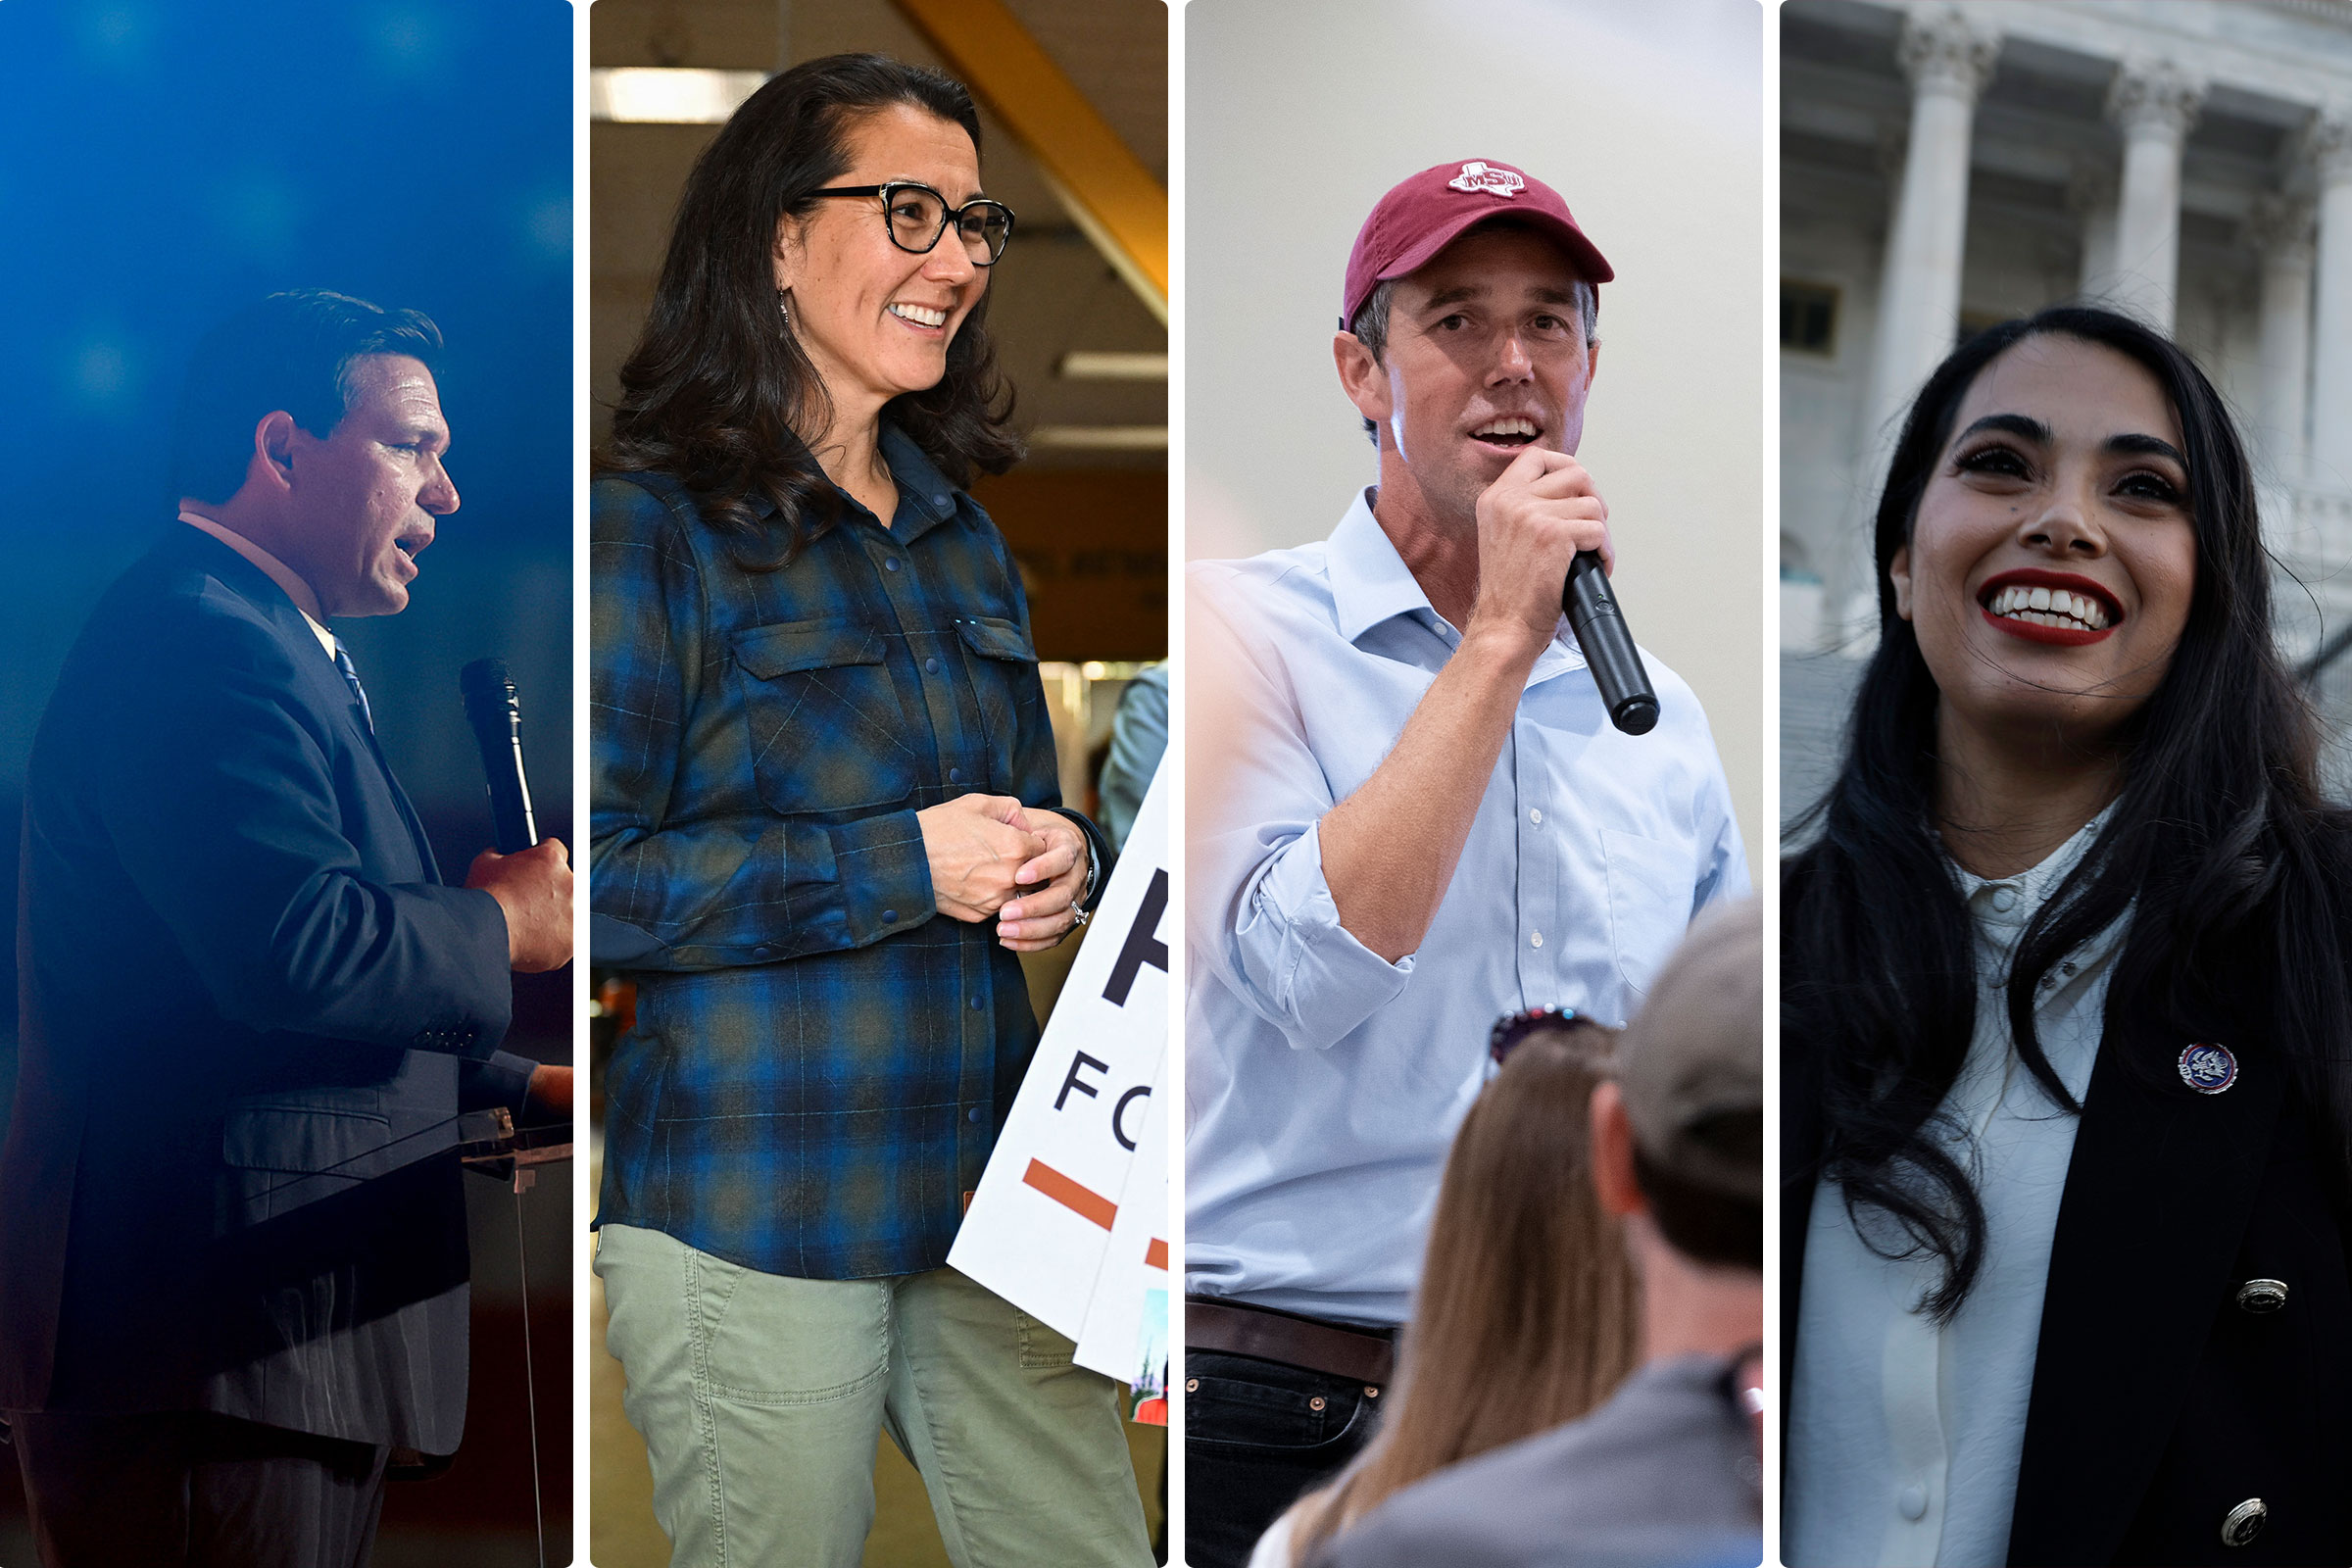 Florida Gov. Ron DeSantis; Rep. Mary Peltola; Texas Democratic gubernatorial candidate Beto O'Rourke; Rep. Mayra Flores (Joe Raedle—Getty Images; Patrick T. Fallon—AFP/Getty Images; Nick Oxford—The Washington Post/Getty Images; Anna Moneymaker—Getty Images)